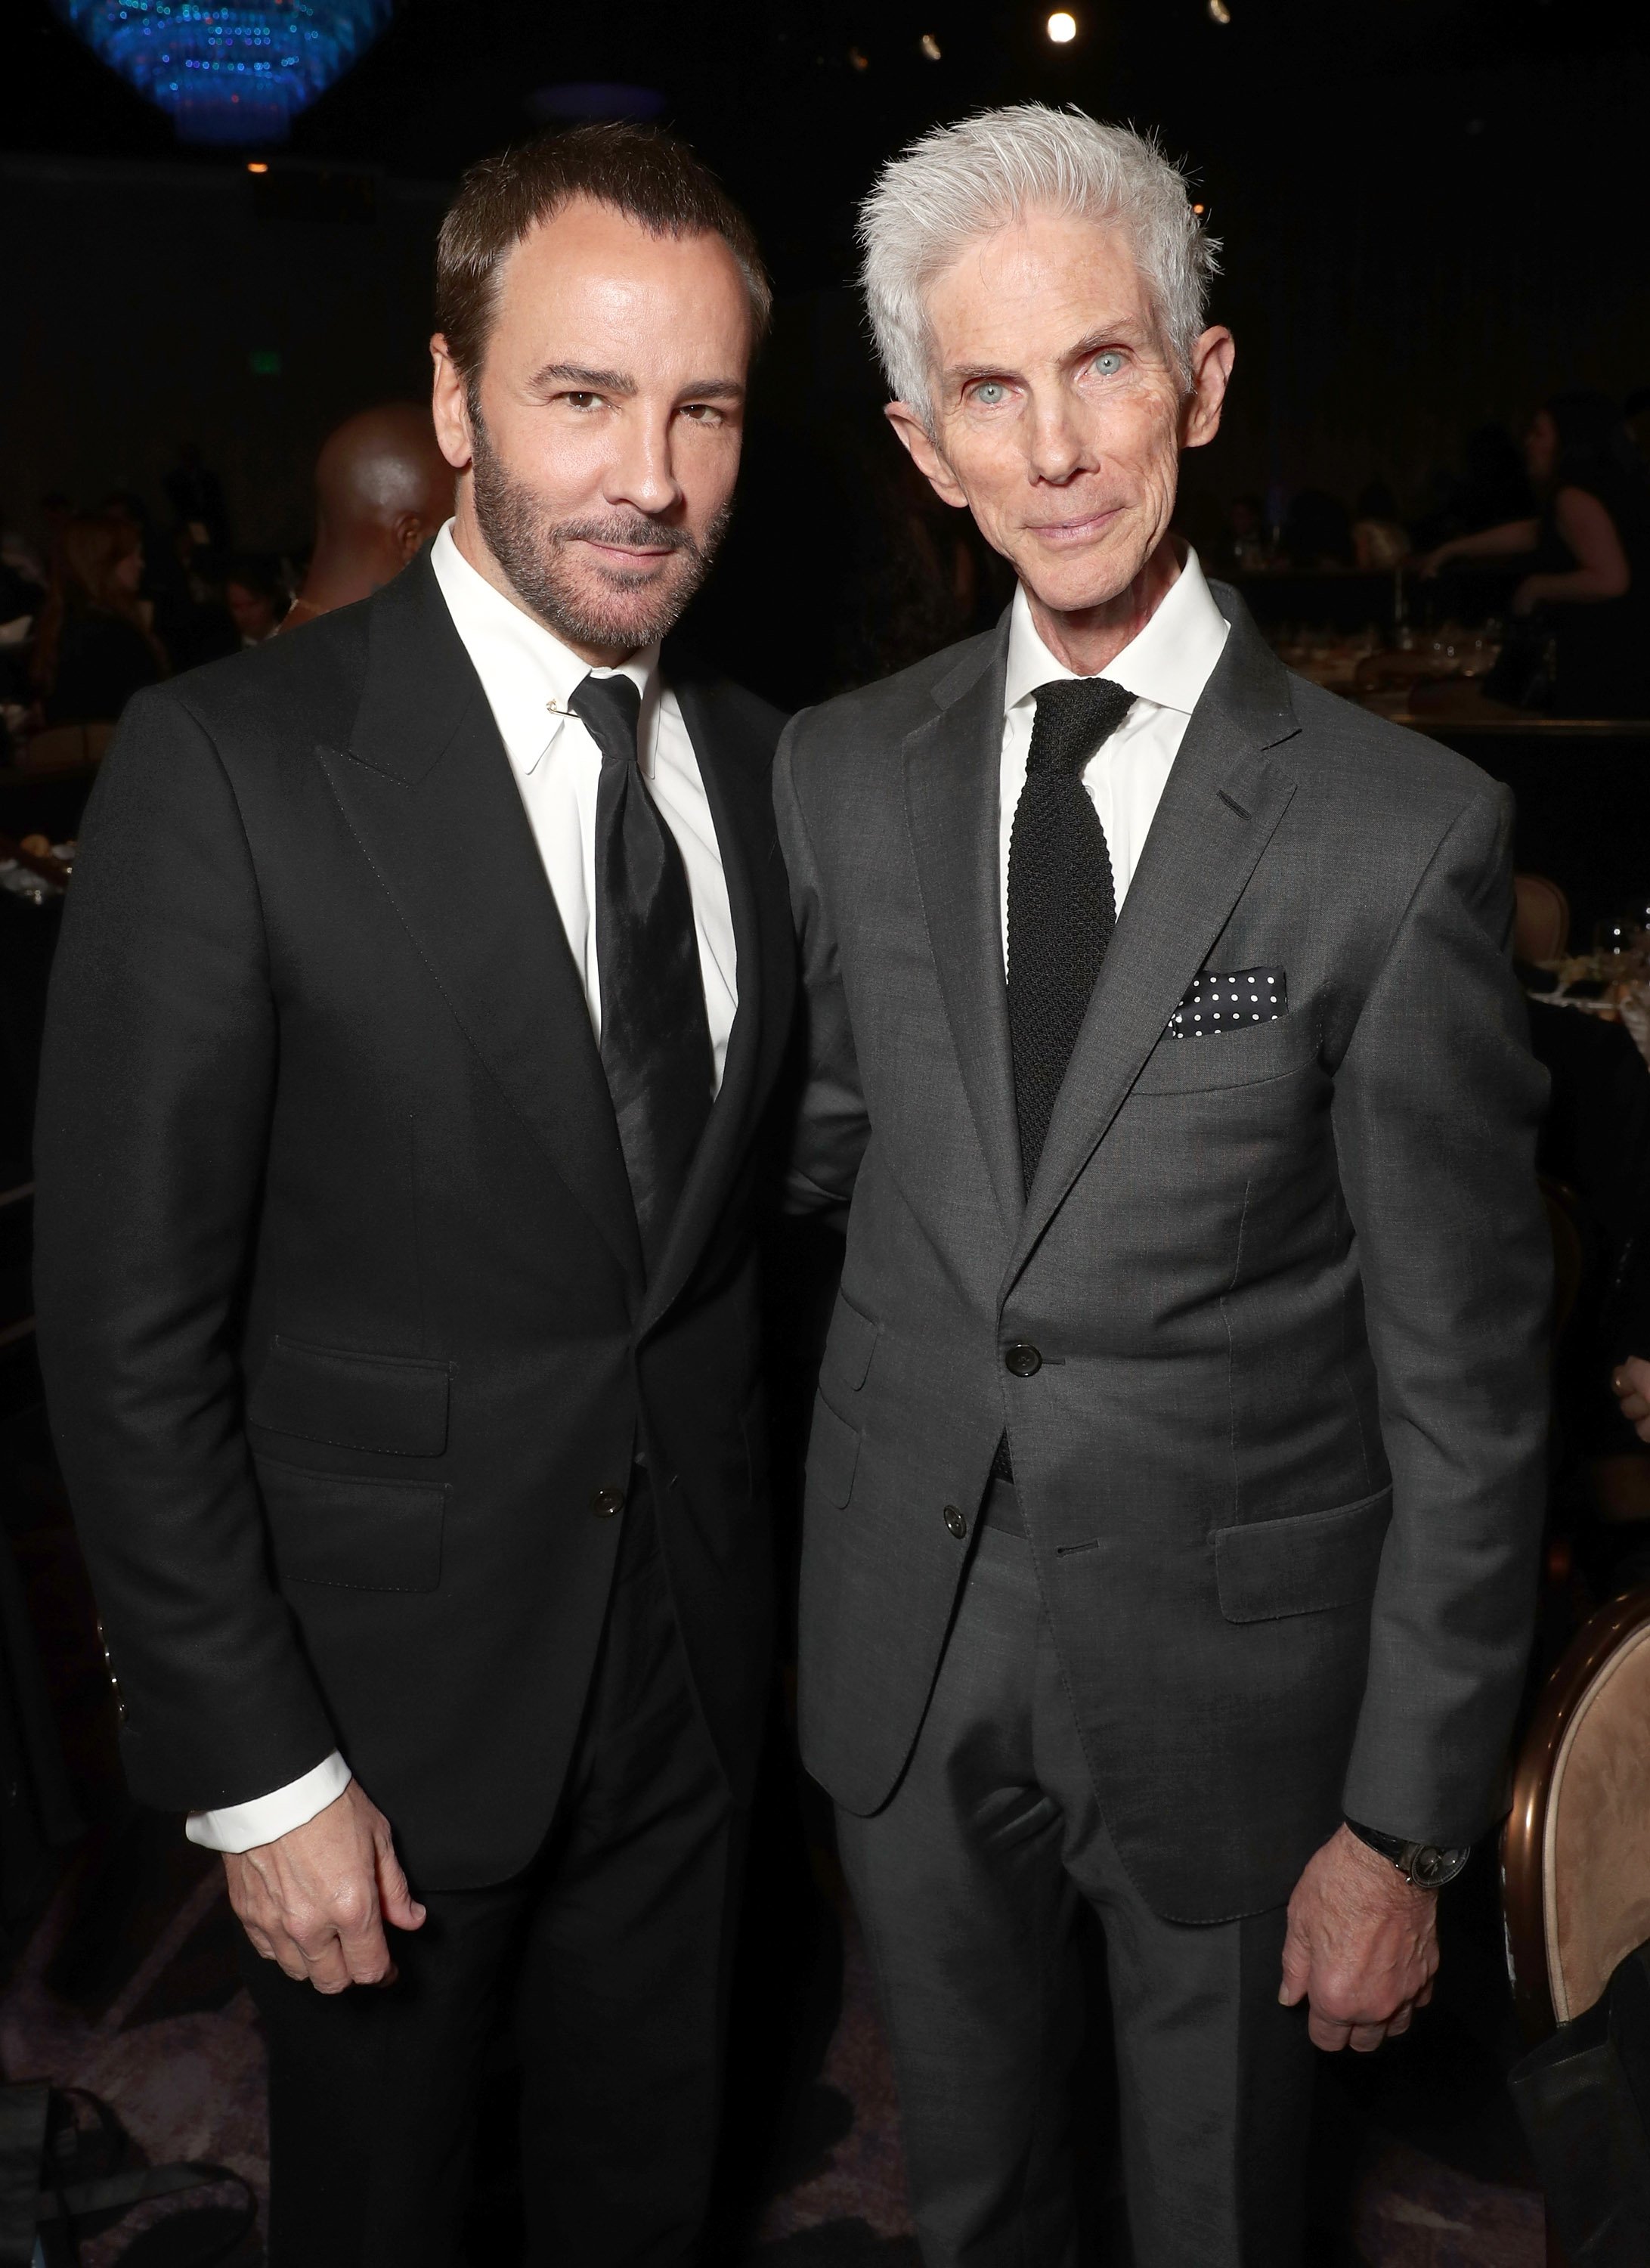 Tom Ford and Richard Buckley attend the 2017 Writers Guild Awards at The Beverly Hilton Hotel on February 19, 2017, in Beverly Hills, California. | Source: Getty Images